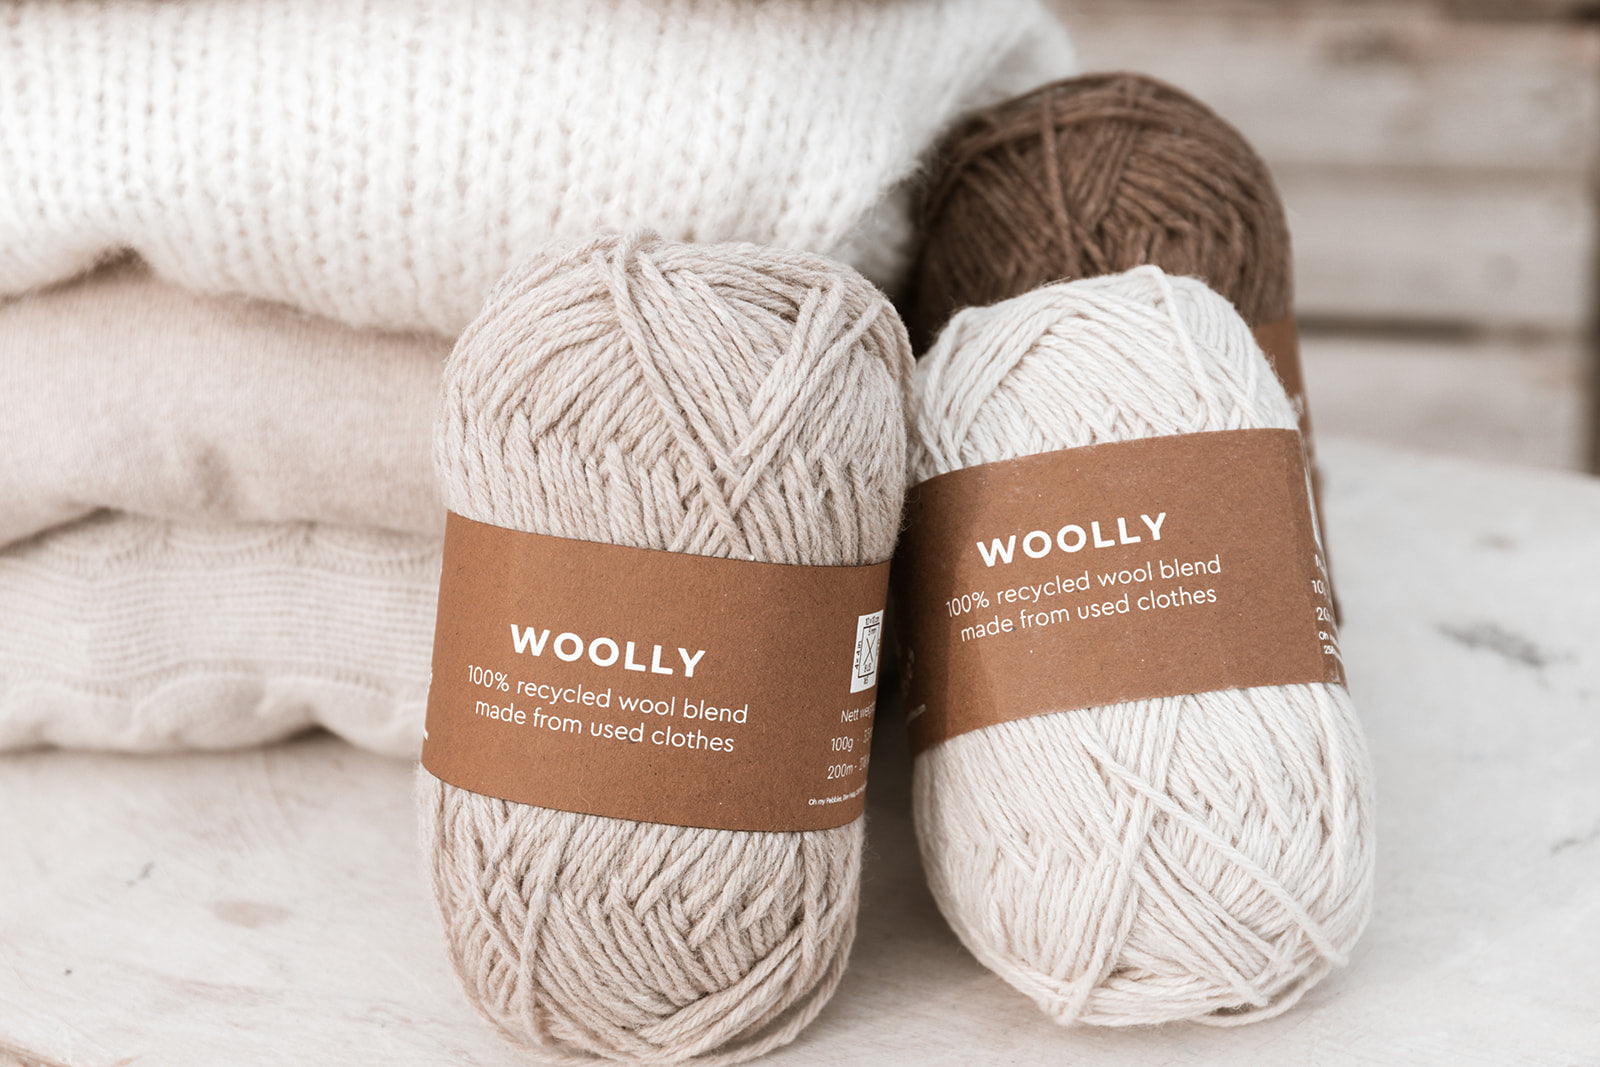 100% recycled knitting yarn made from used clothes – Oh my Pebbles